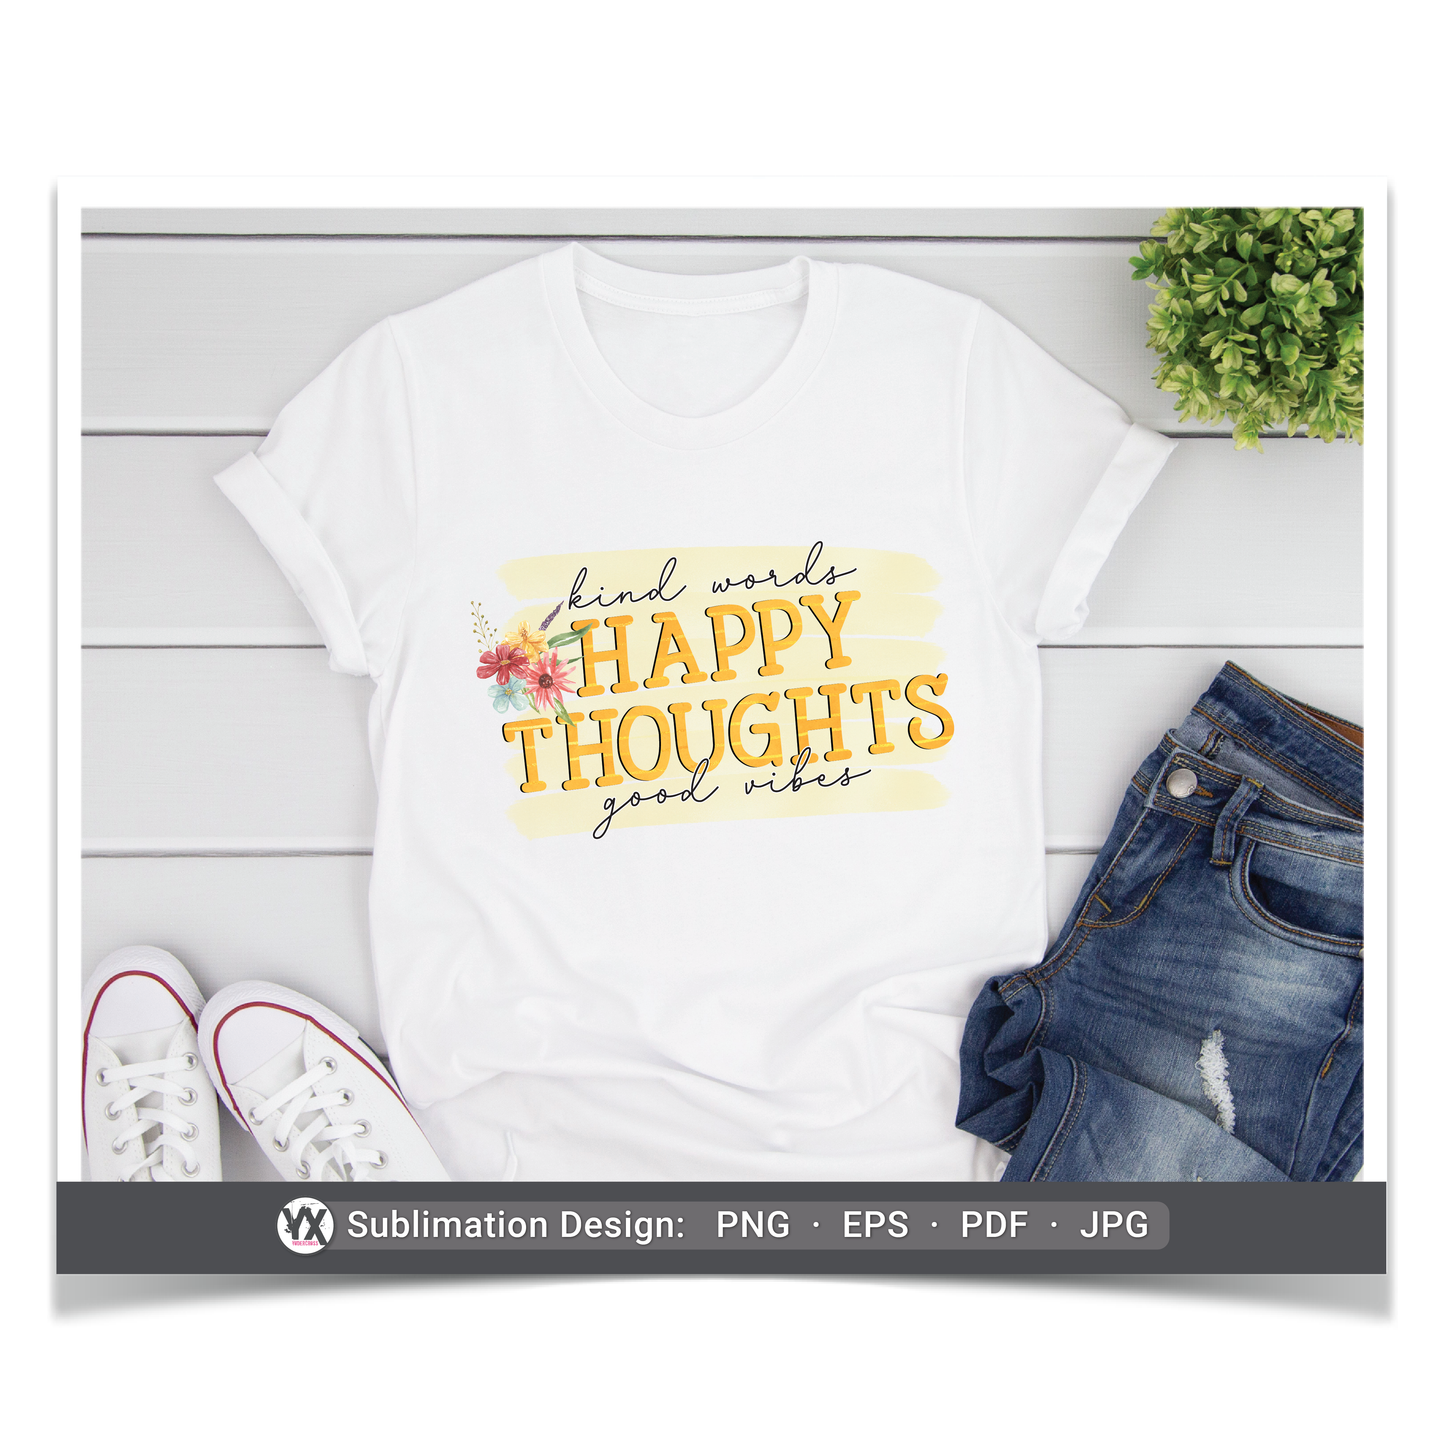 Kind Words, Happy Thoughts, Good Vibes (Sublimation)